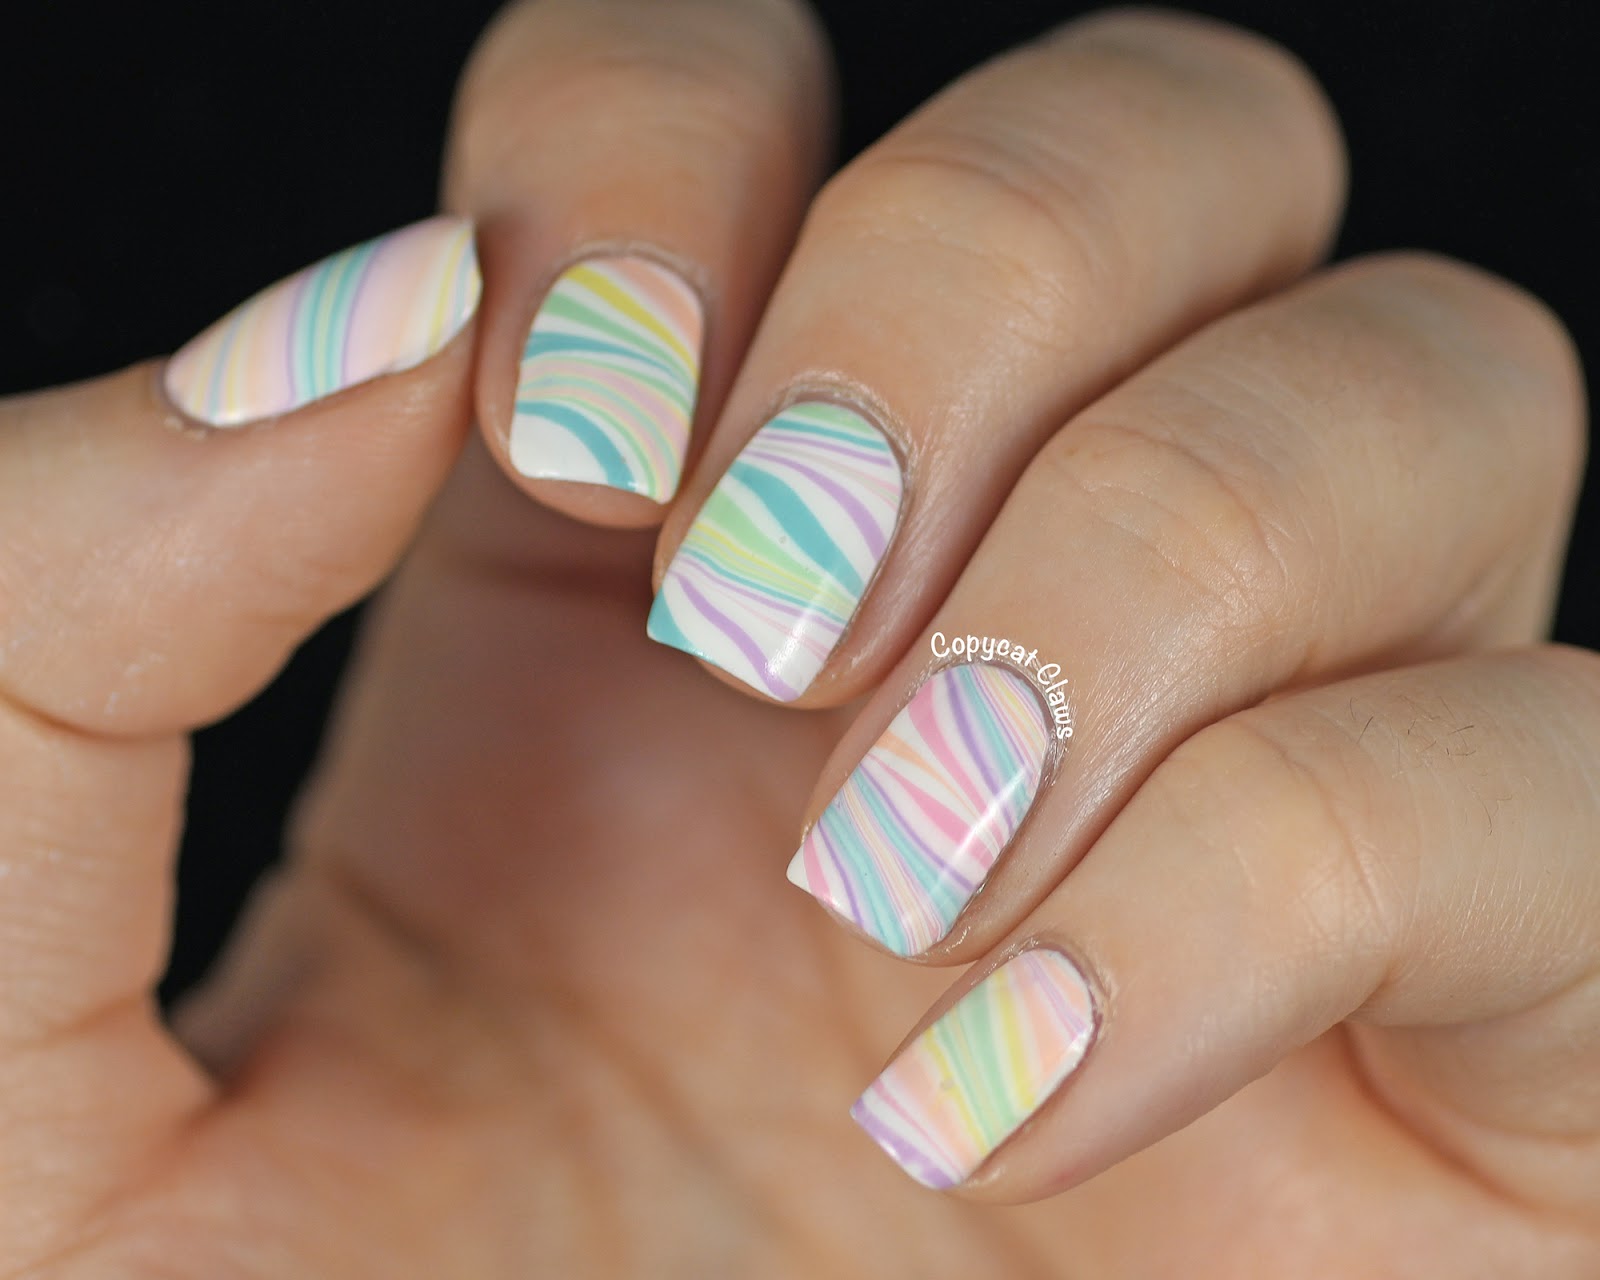 3. The Importance of Using a Top Coat for Nail Art Water Marble - wide 5